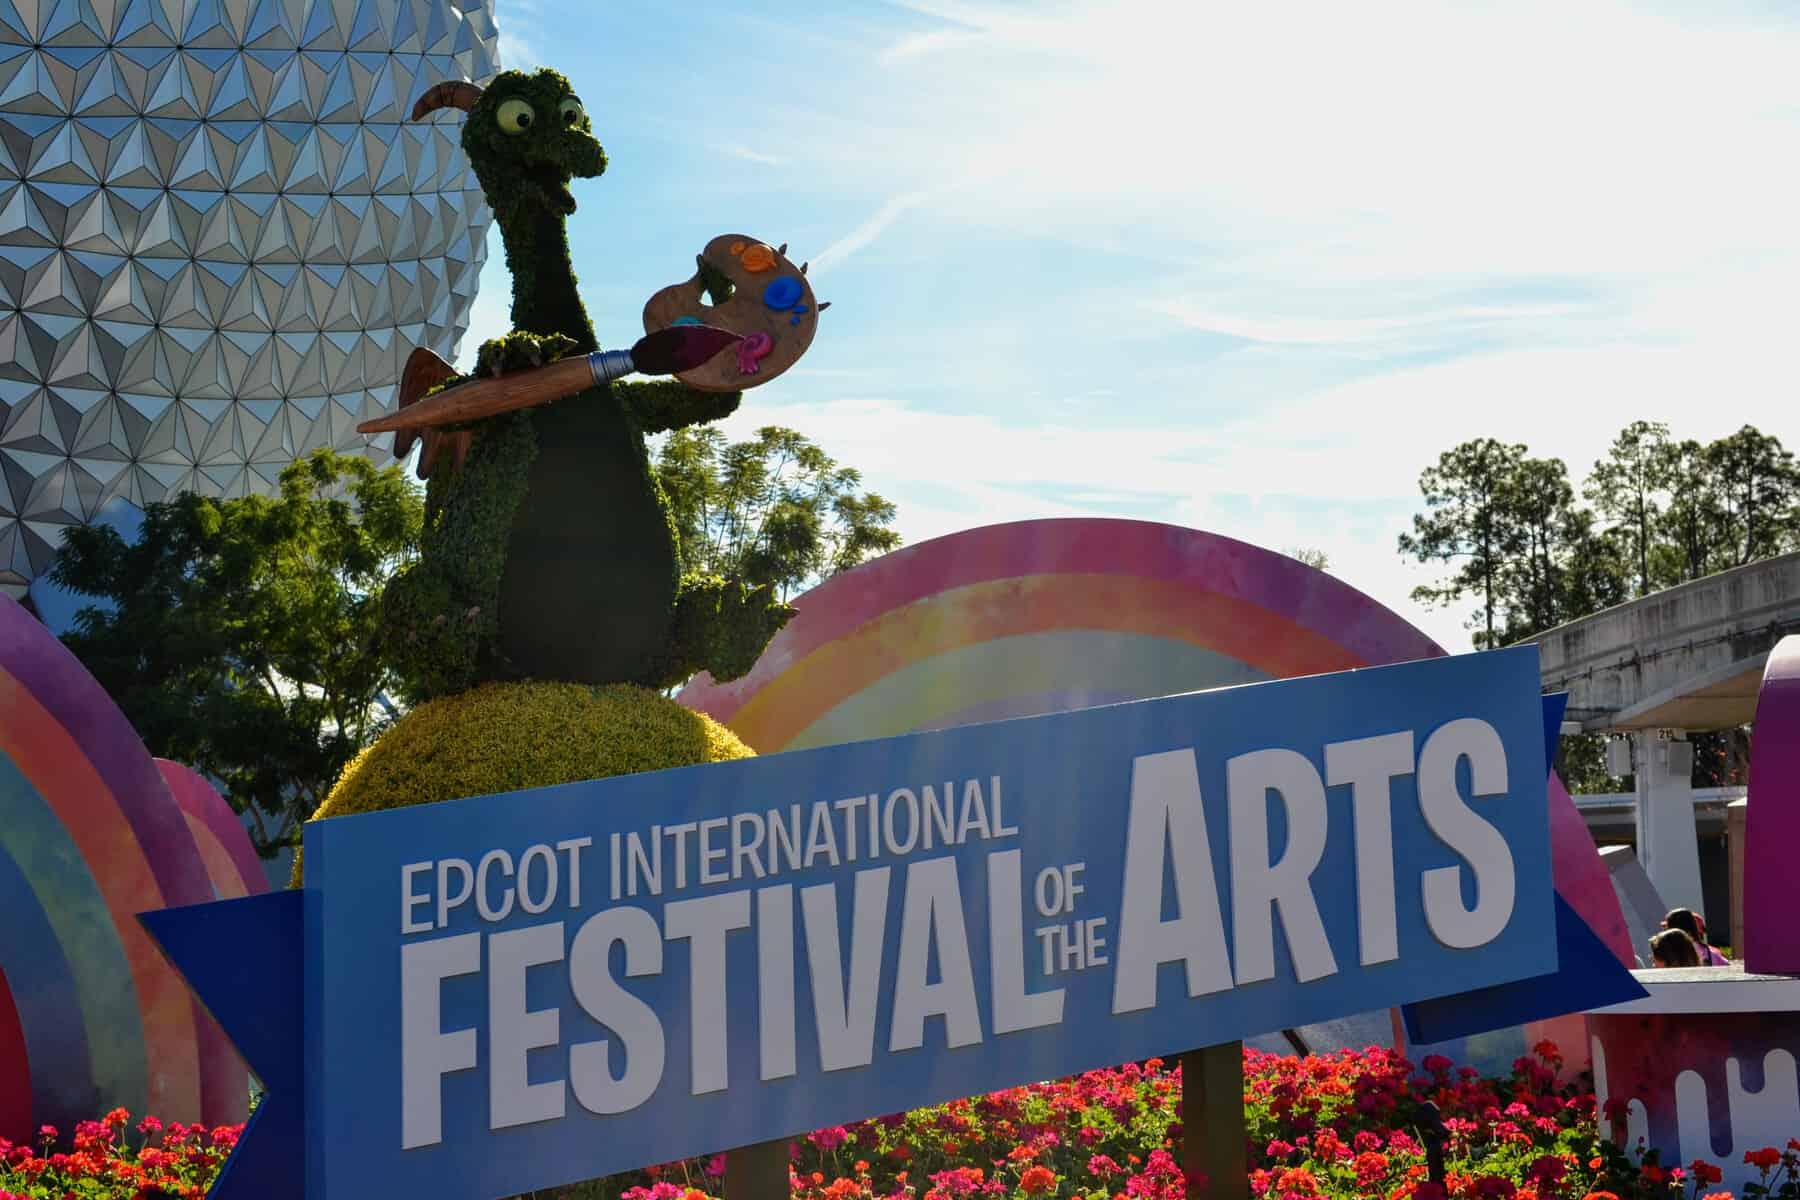 Epcot’s 2020 Festival of the Arts Food Menus & Workshops Announced